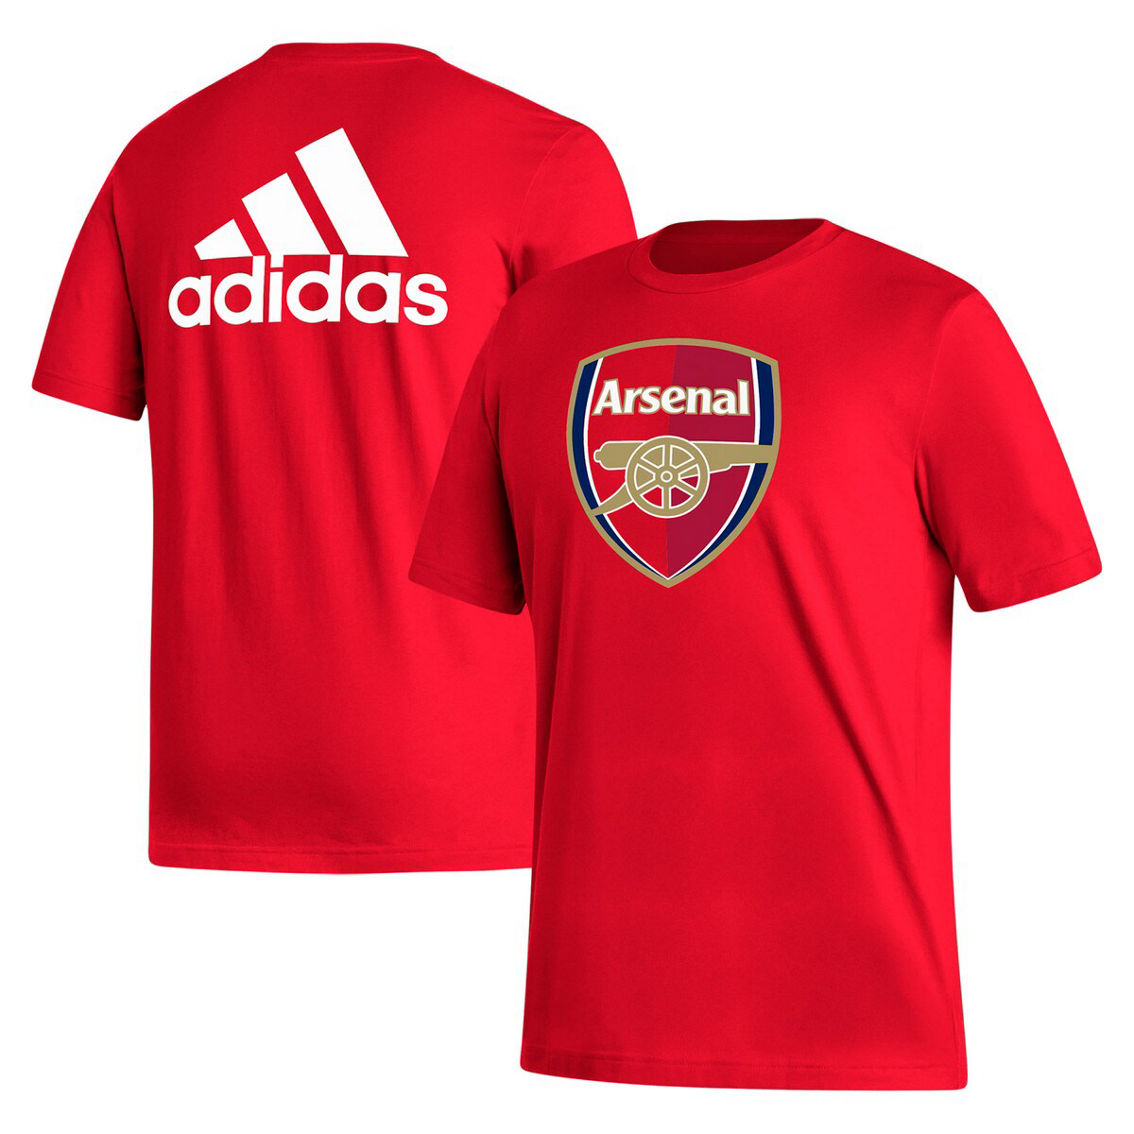 adidas Men's Red Arsenal Crest T-Shirt - Image 2 of 4